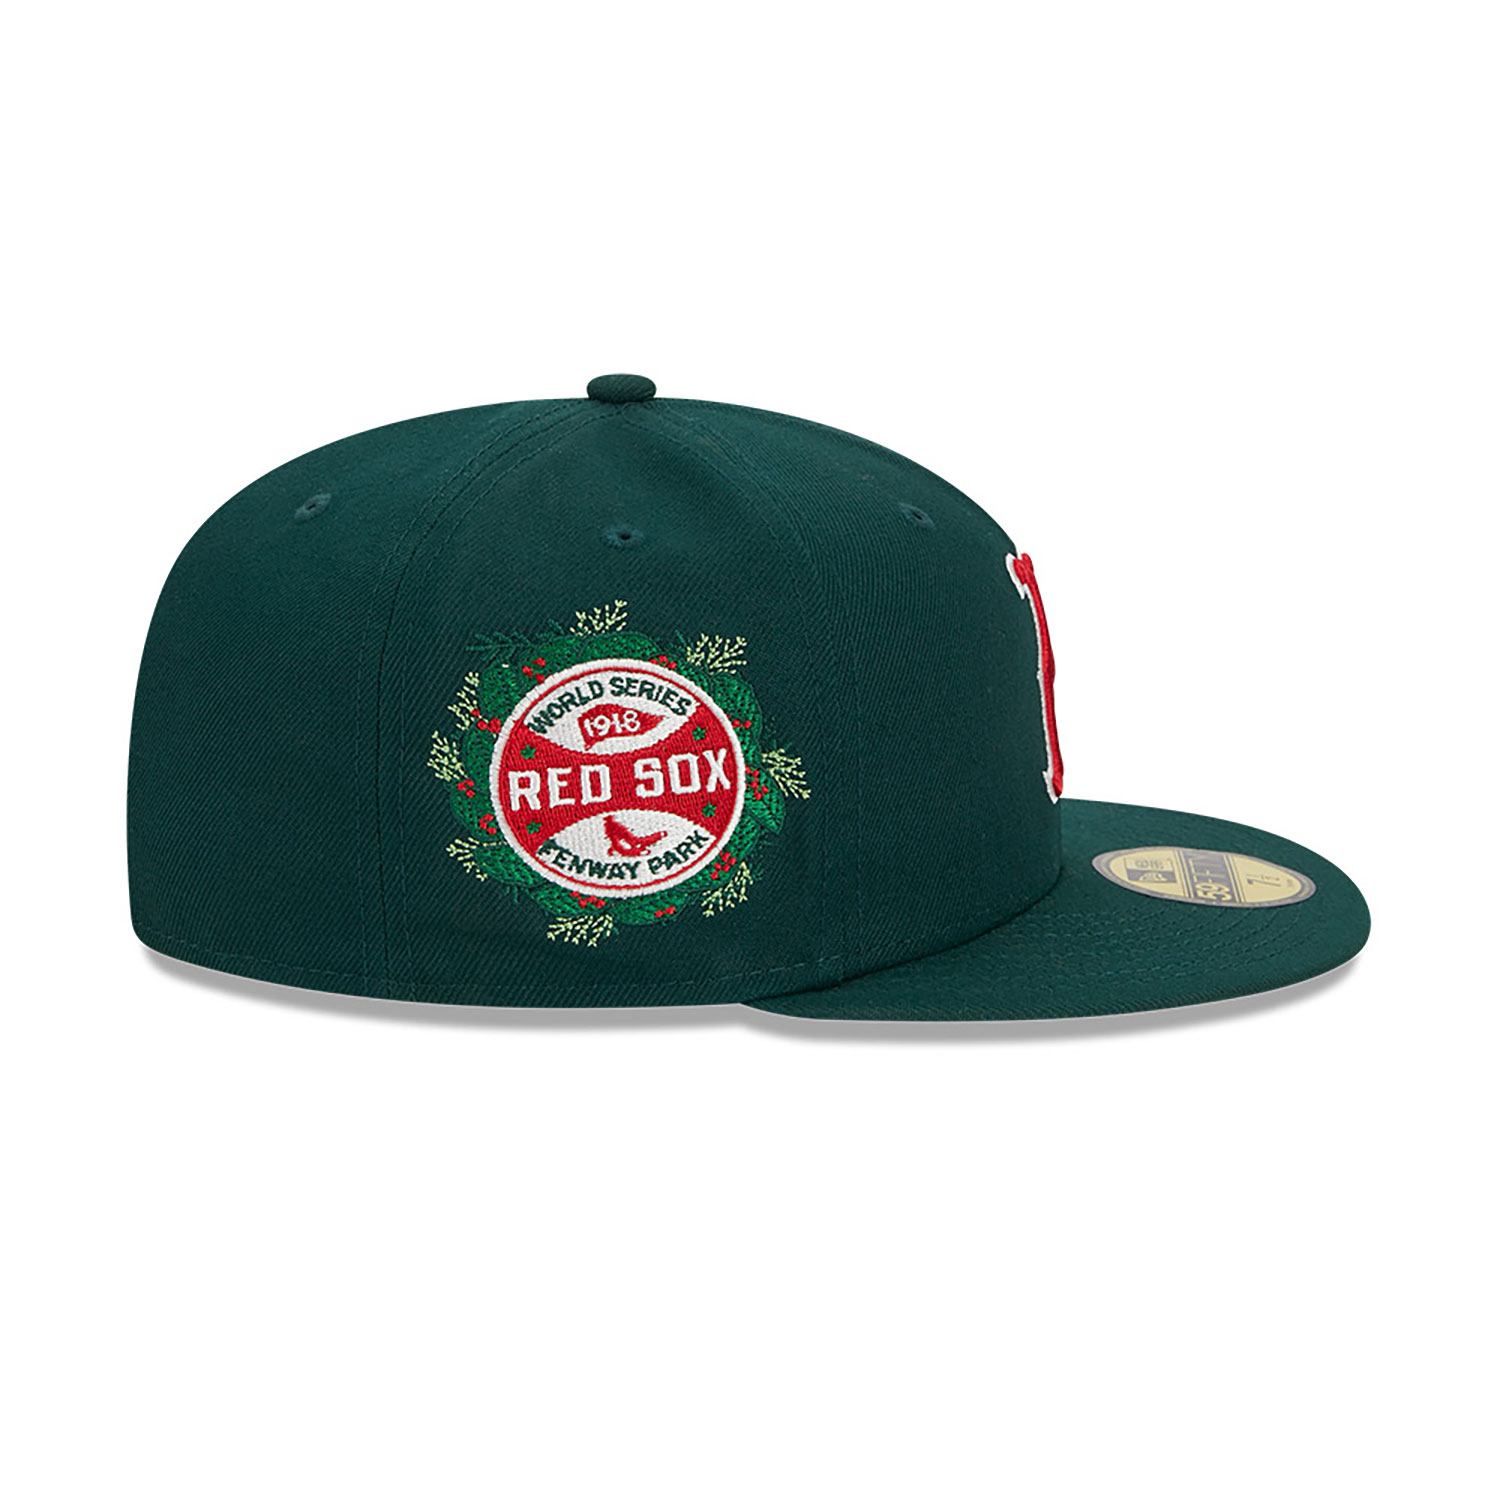 Boston Red Sox Spice Berry Dark Green 59FIFTY Fitted Cap